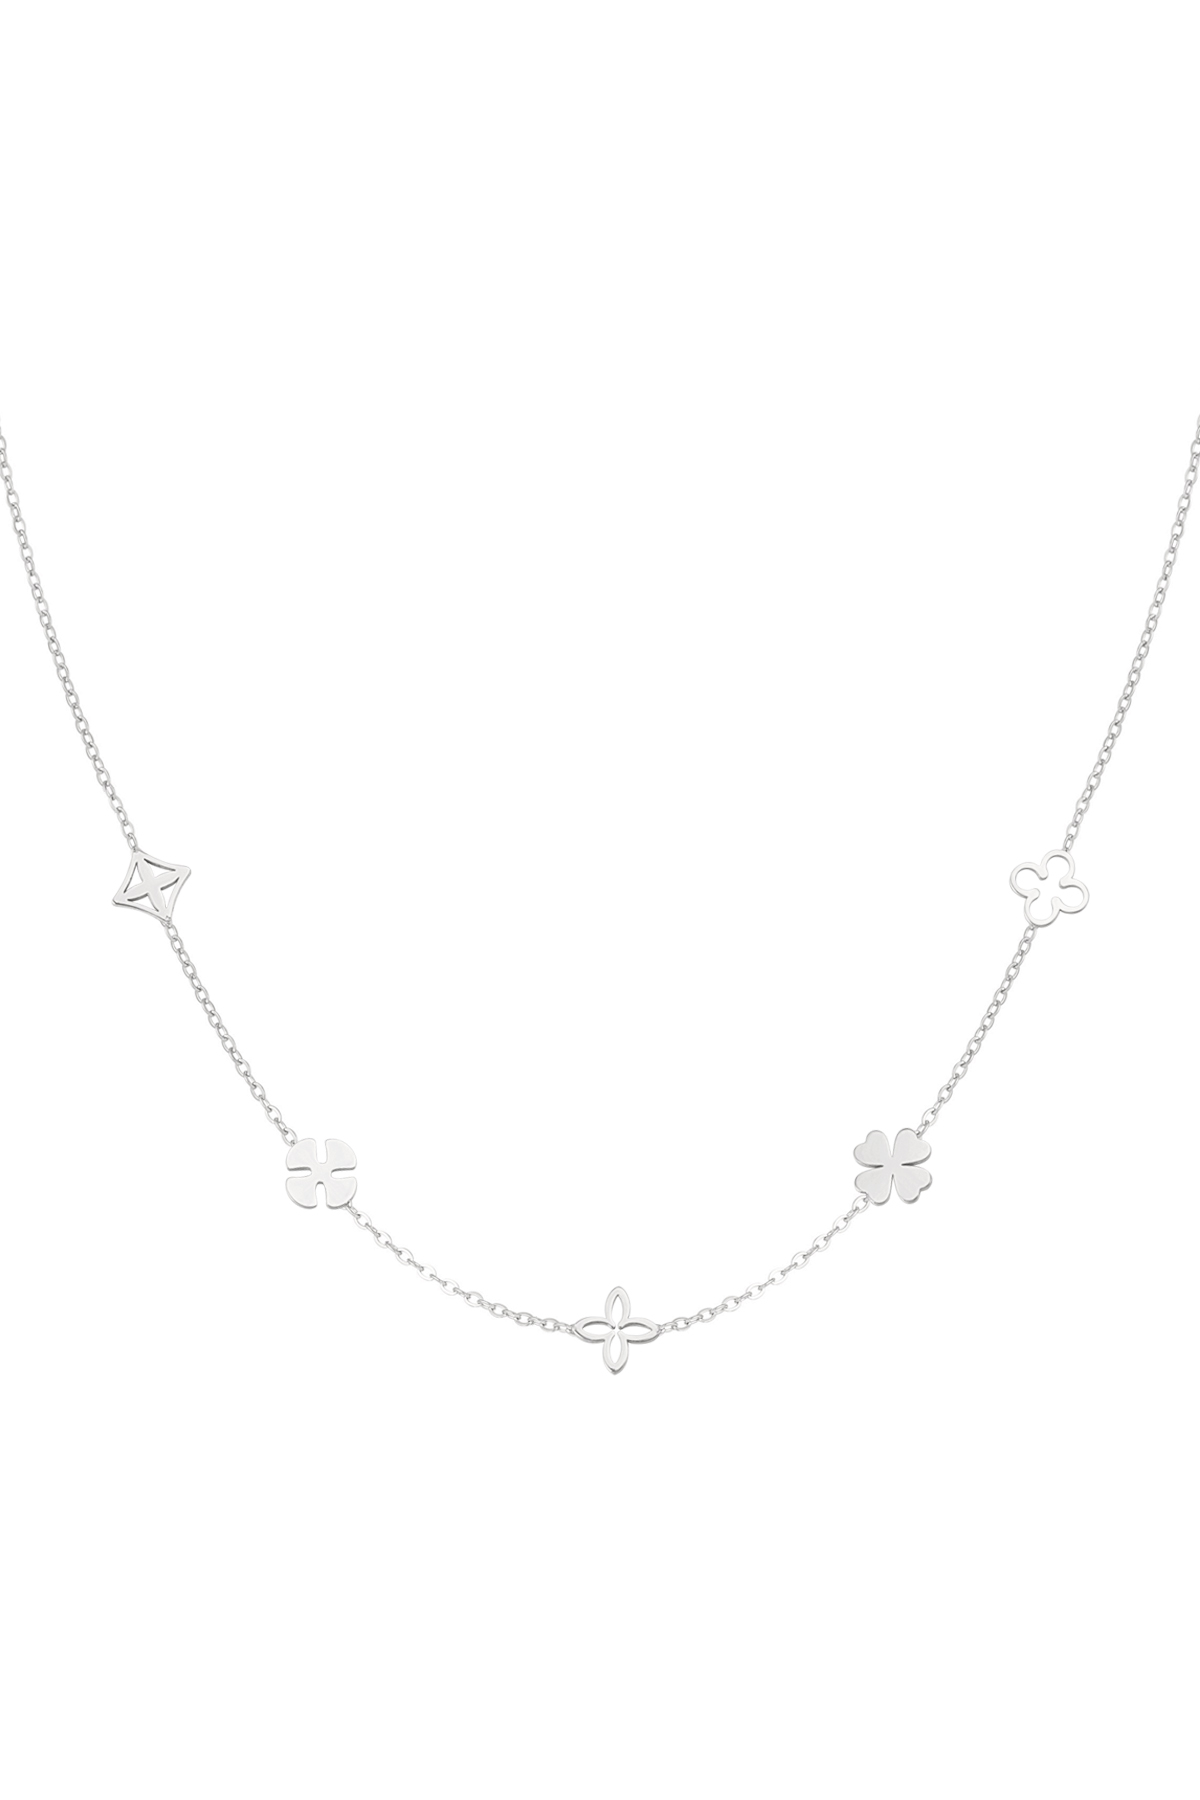 Flower power necklace - silver h5 